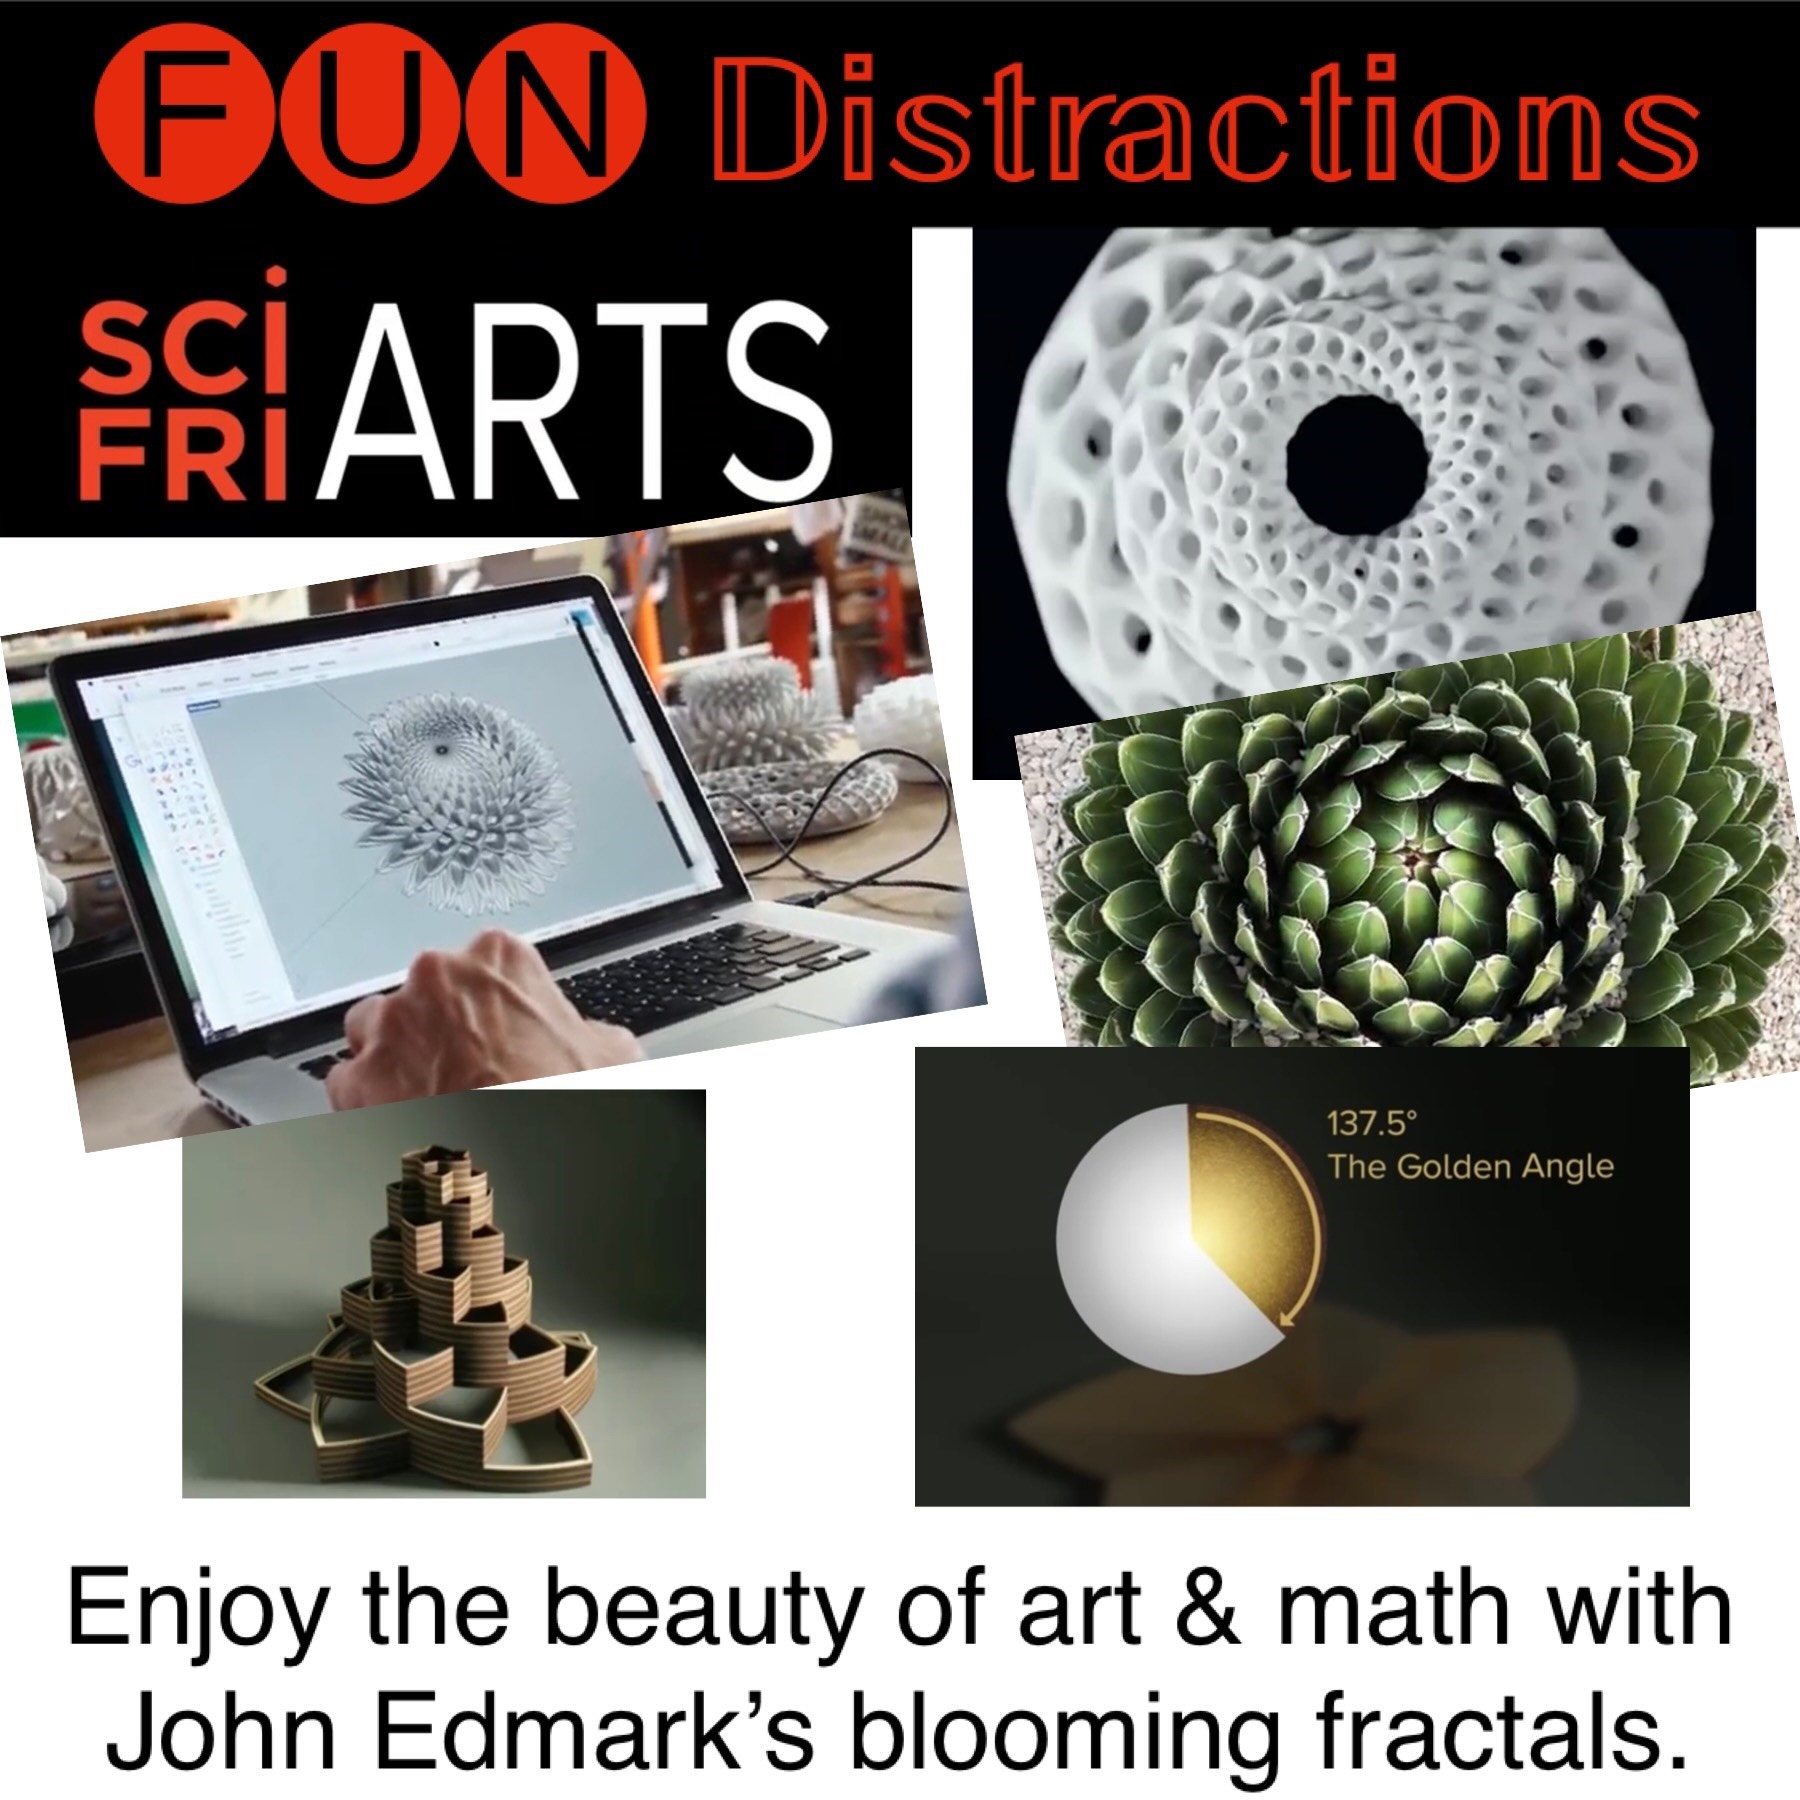 Image advertising the Library’s FUN Distractions series post on the Art & Math or John Edmark